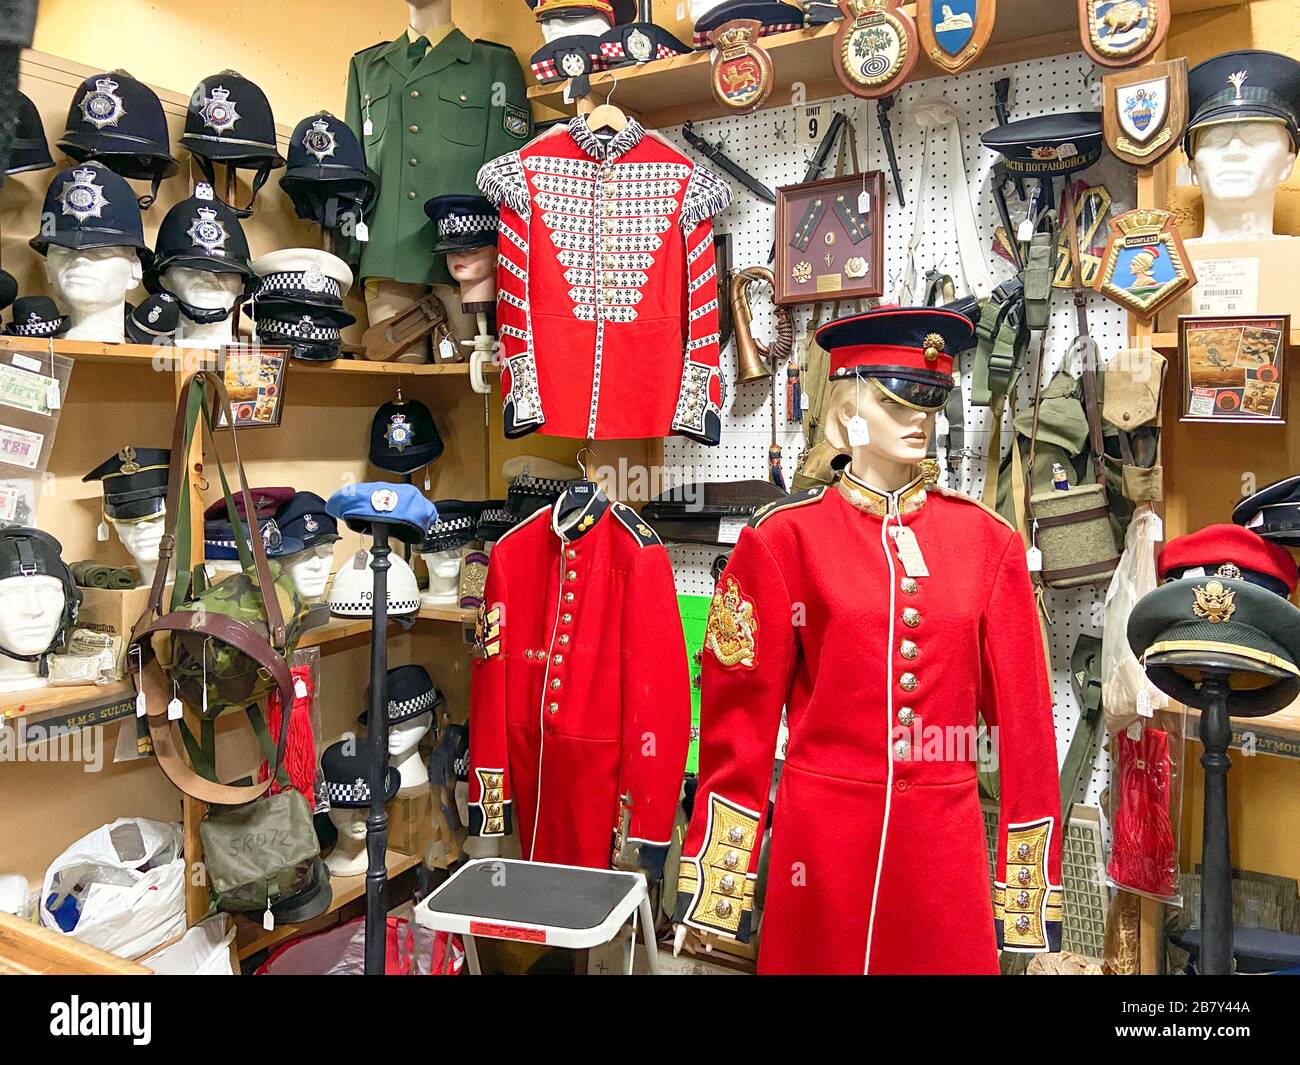 Military antiques and collectables at Brackley Antique Cellar, Draymans Walk, Brackley, Northamptonshire, England, United Kingdom Stock Photo